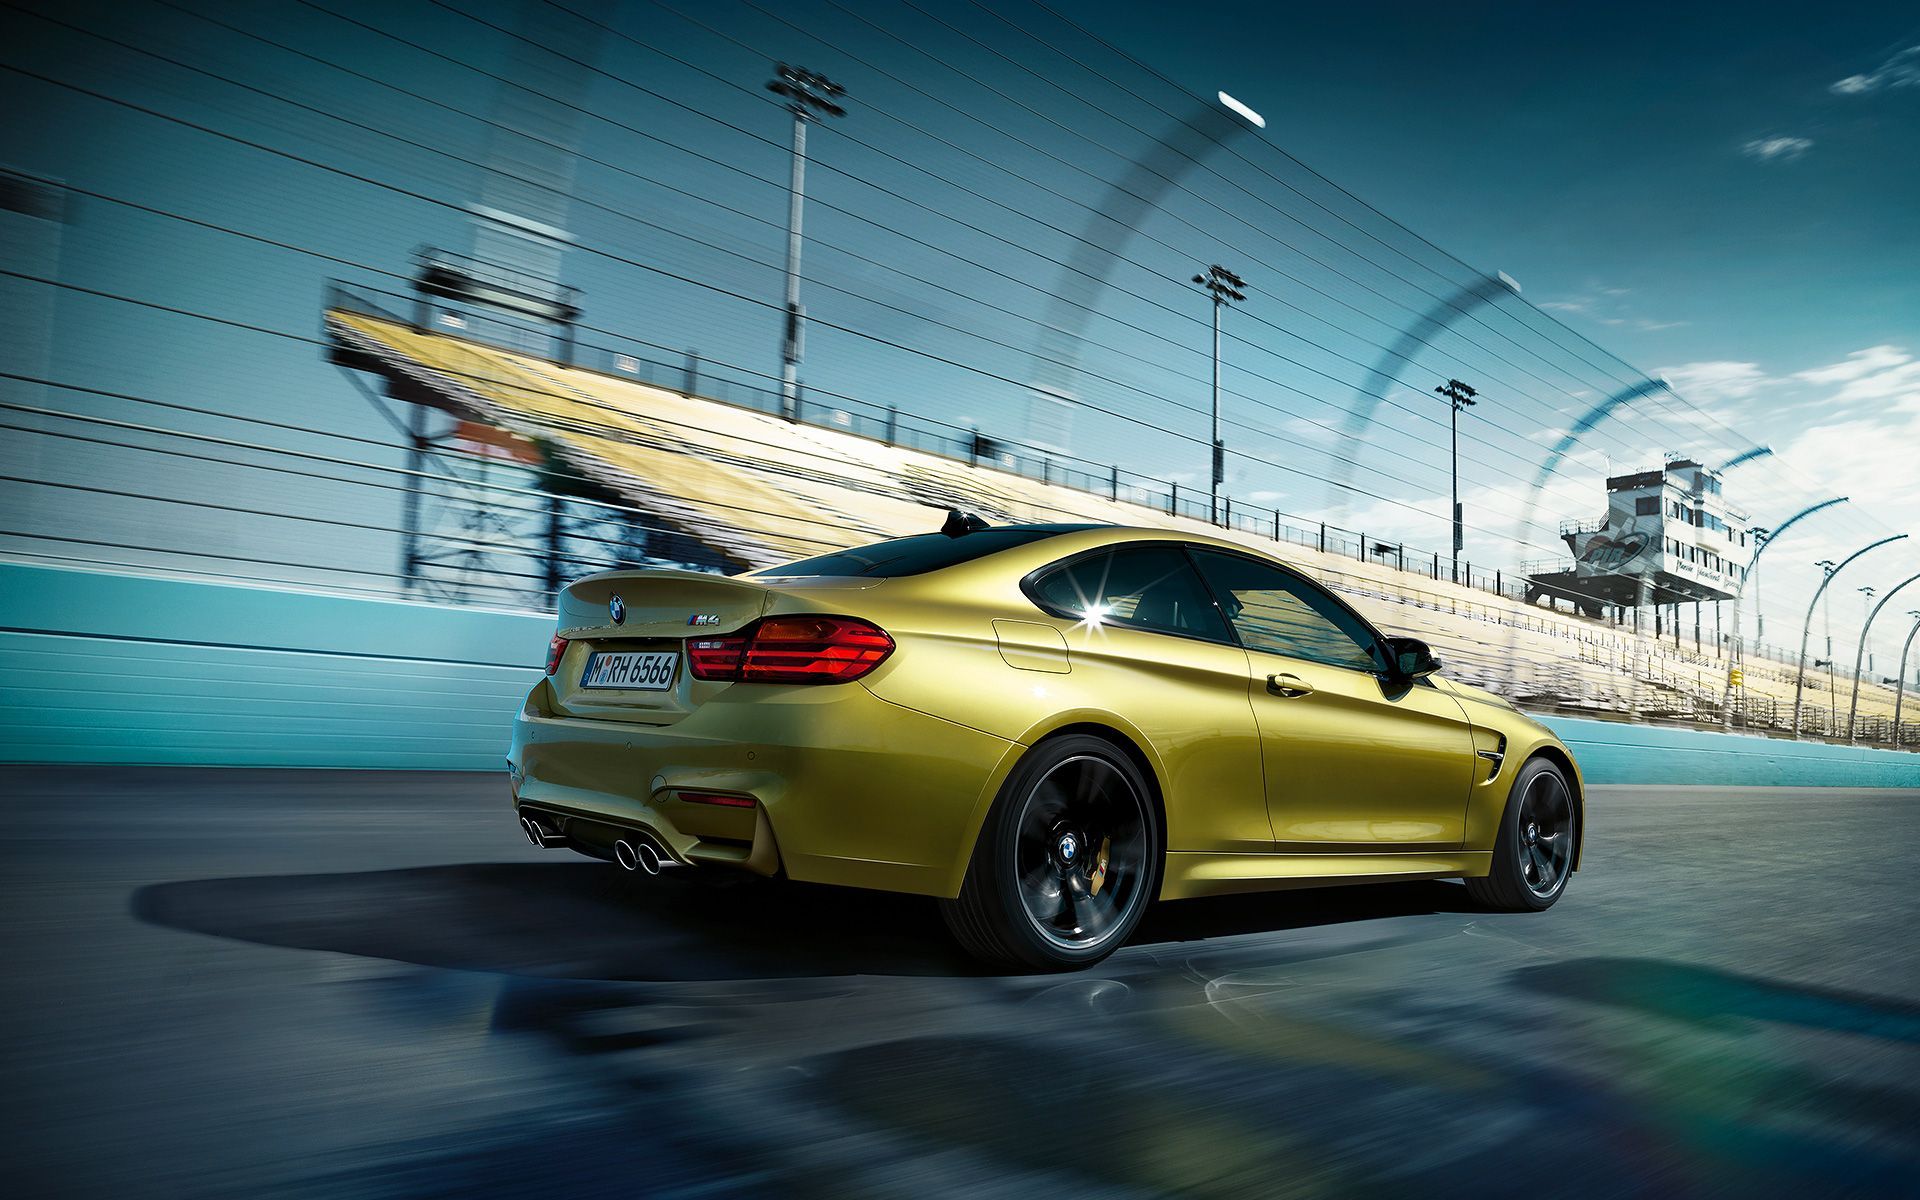 BMW M4 and BMW M3 Wallpapers - DOWNLOAD NOW!